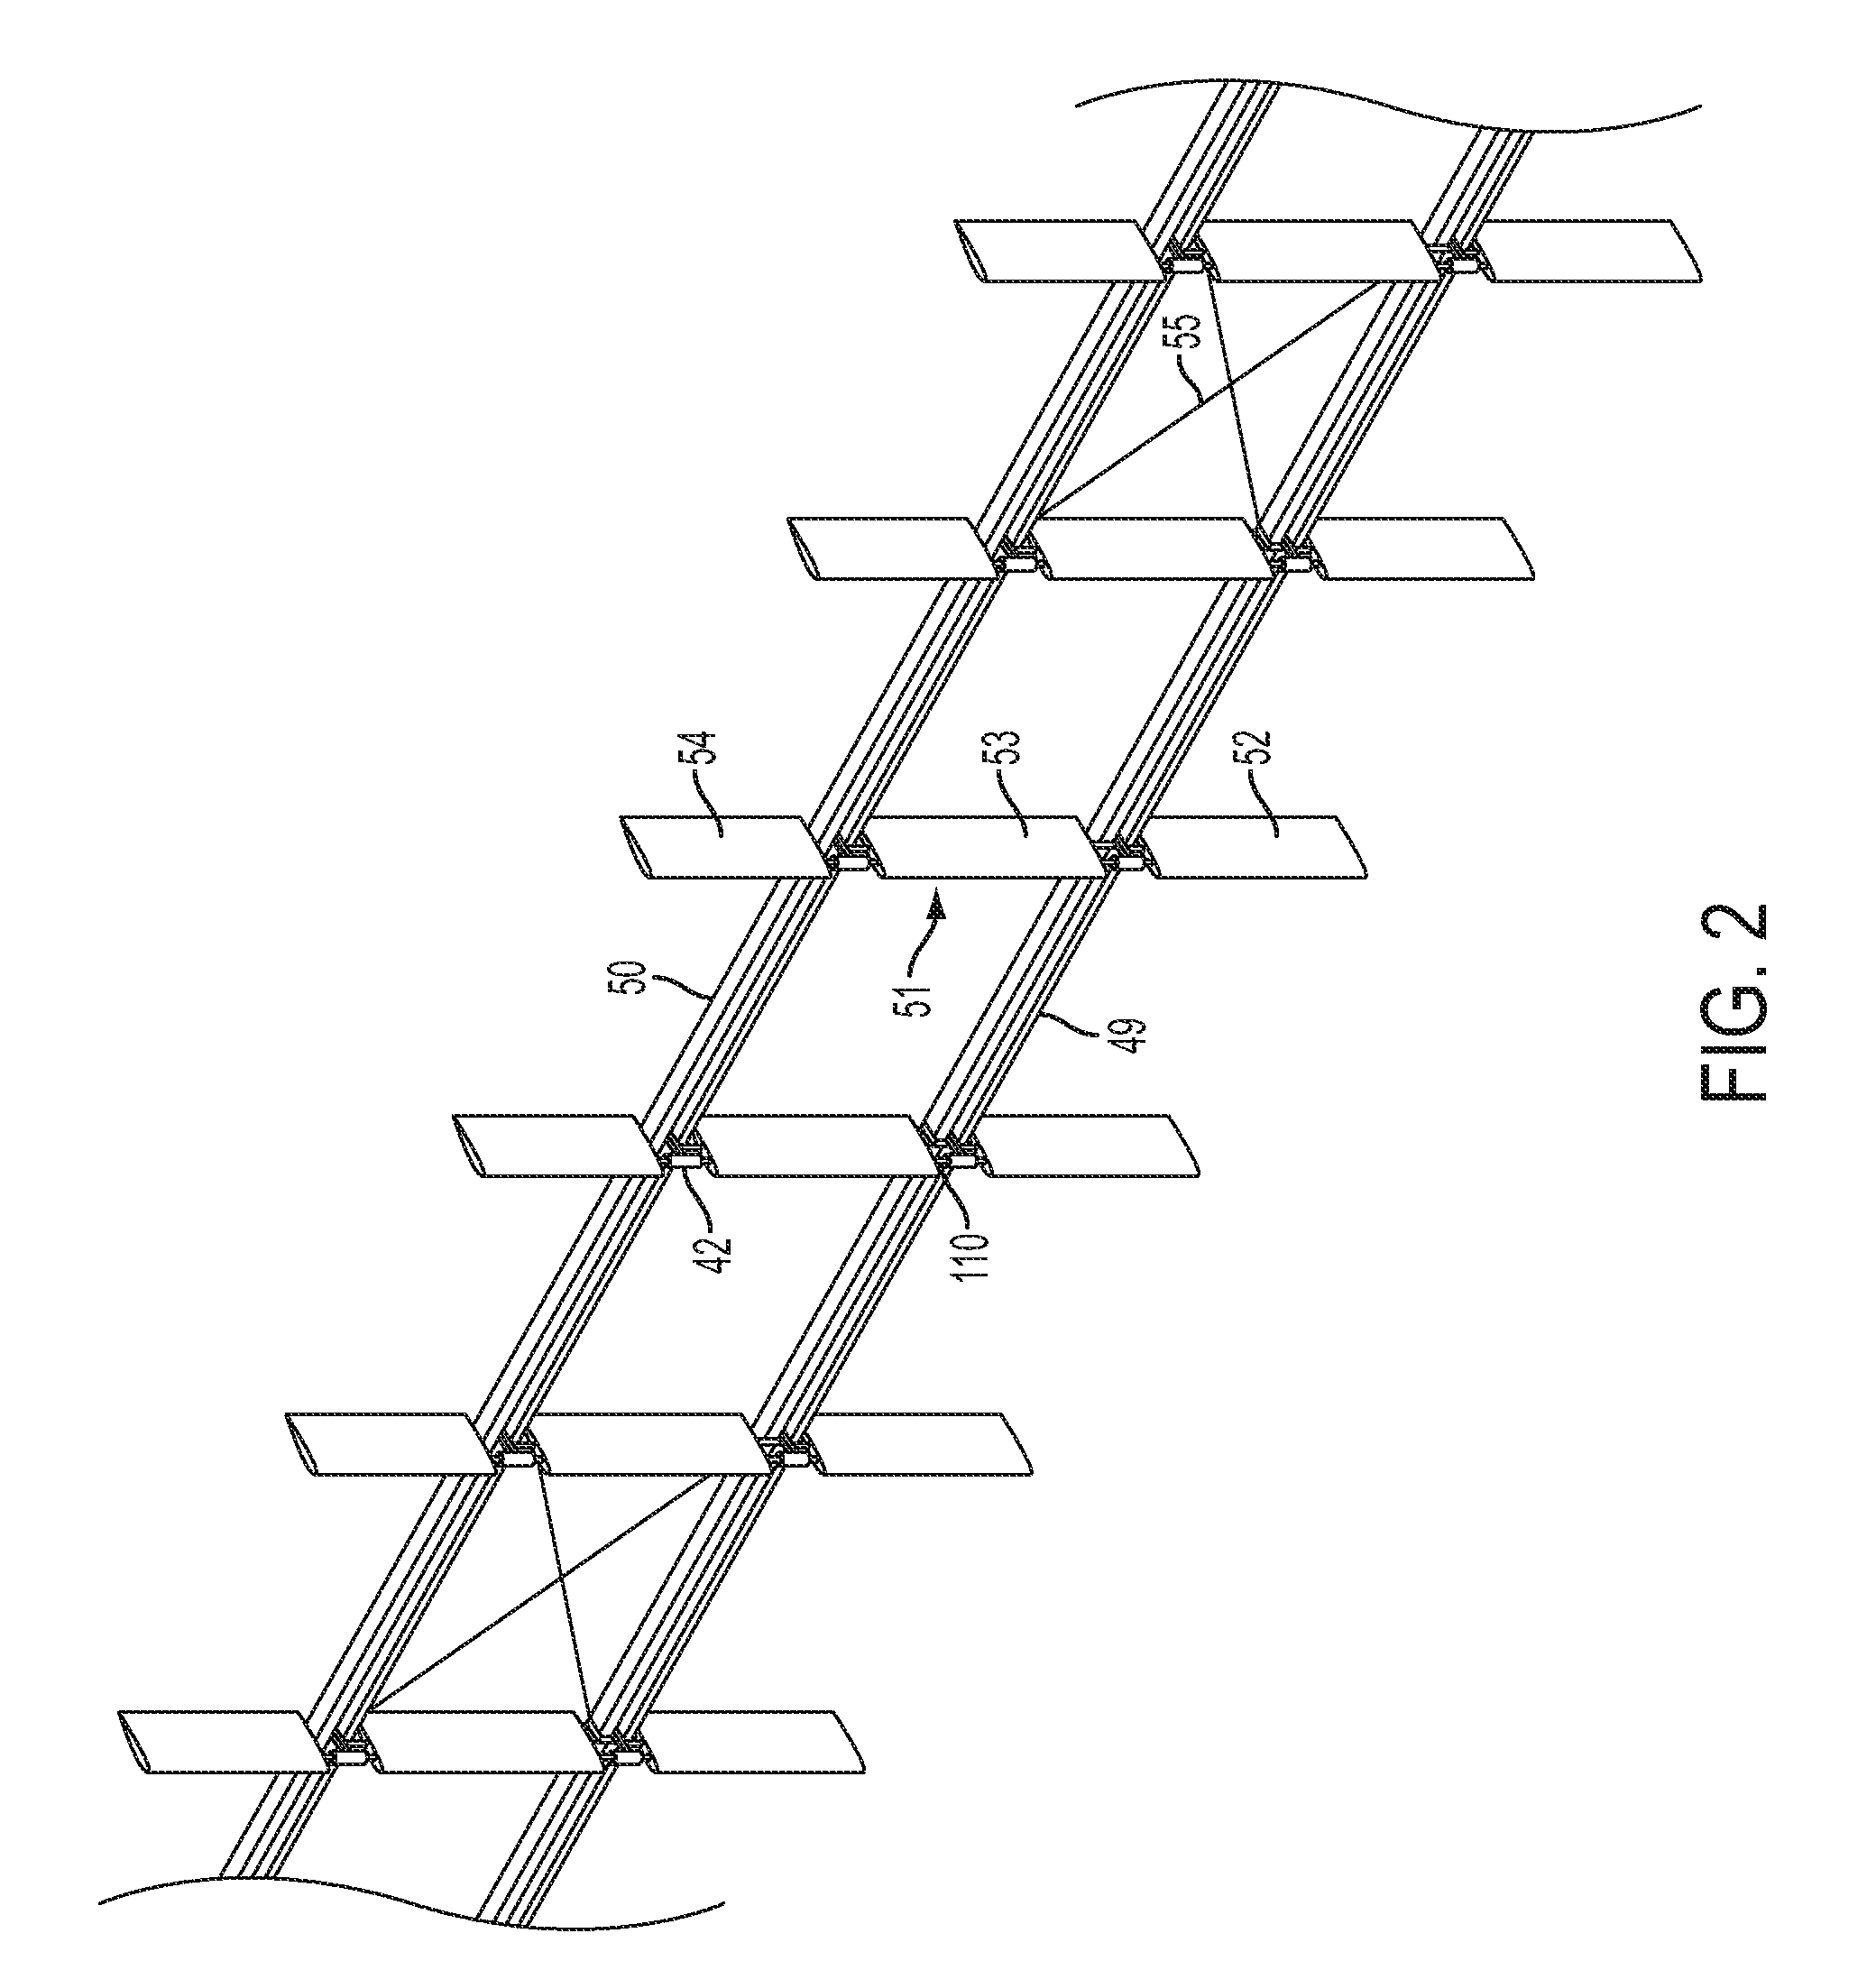 Wind and water power generation device using a tiered monorail system